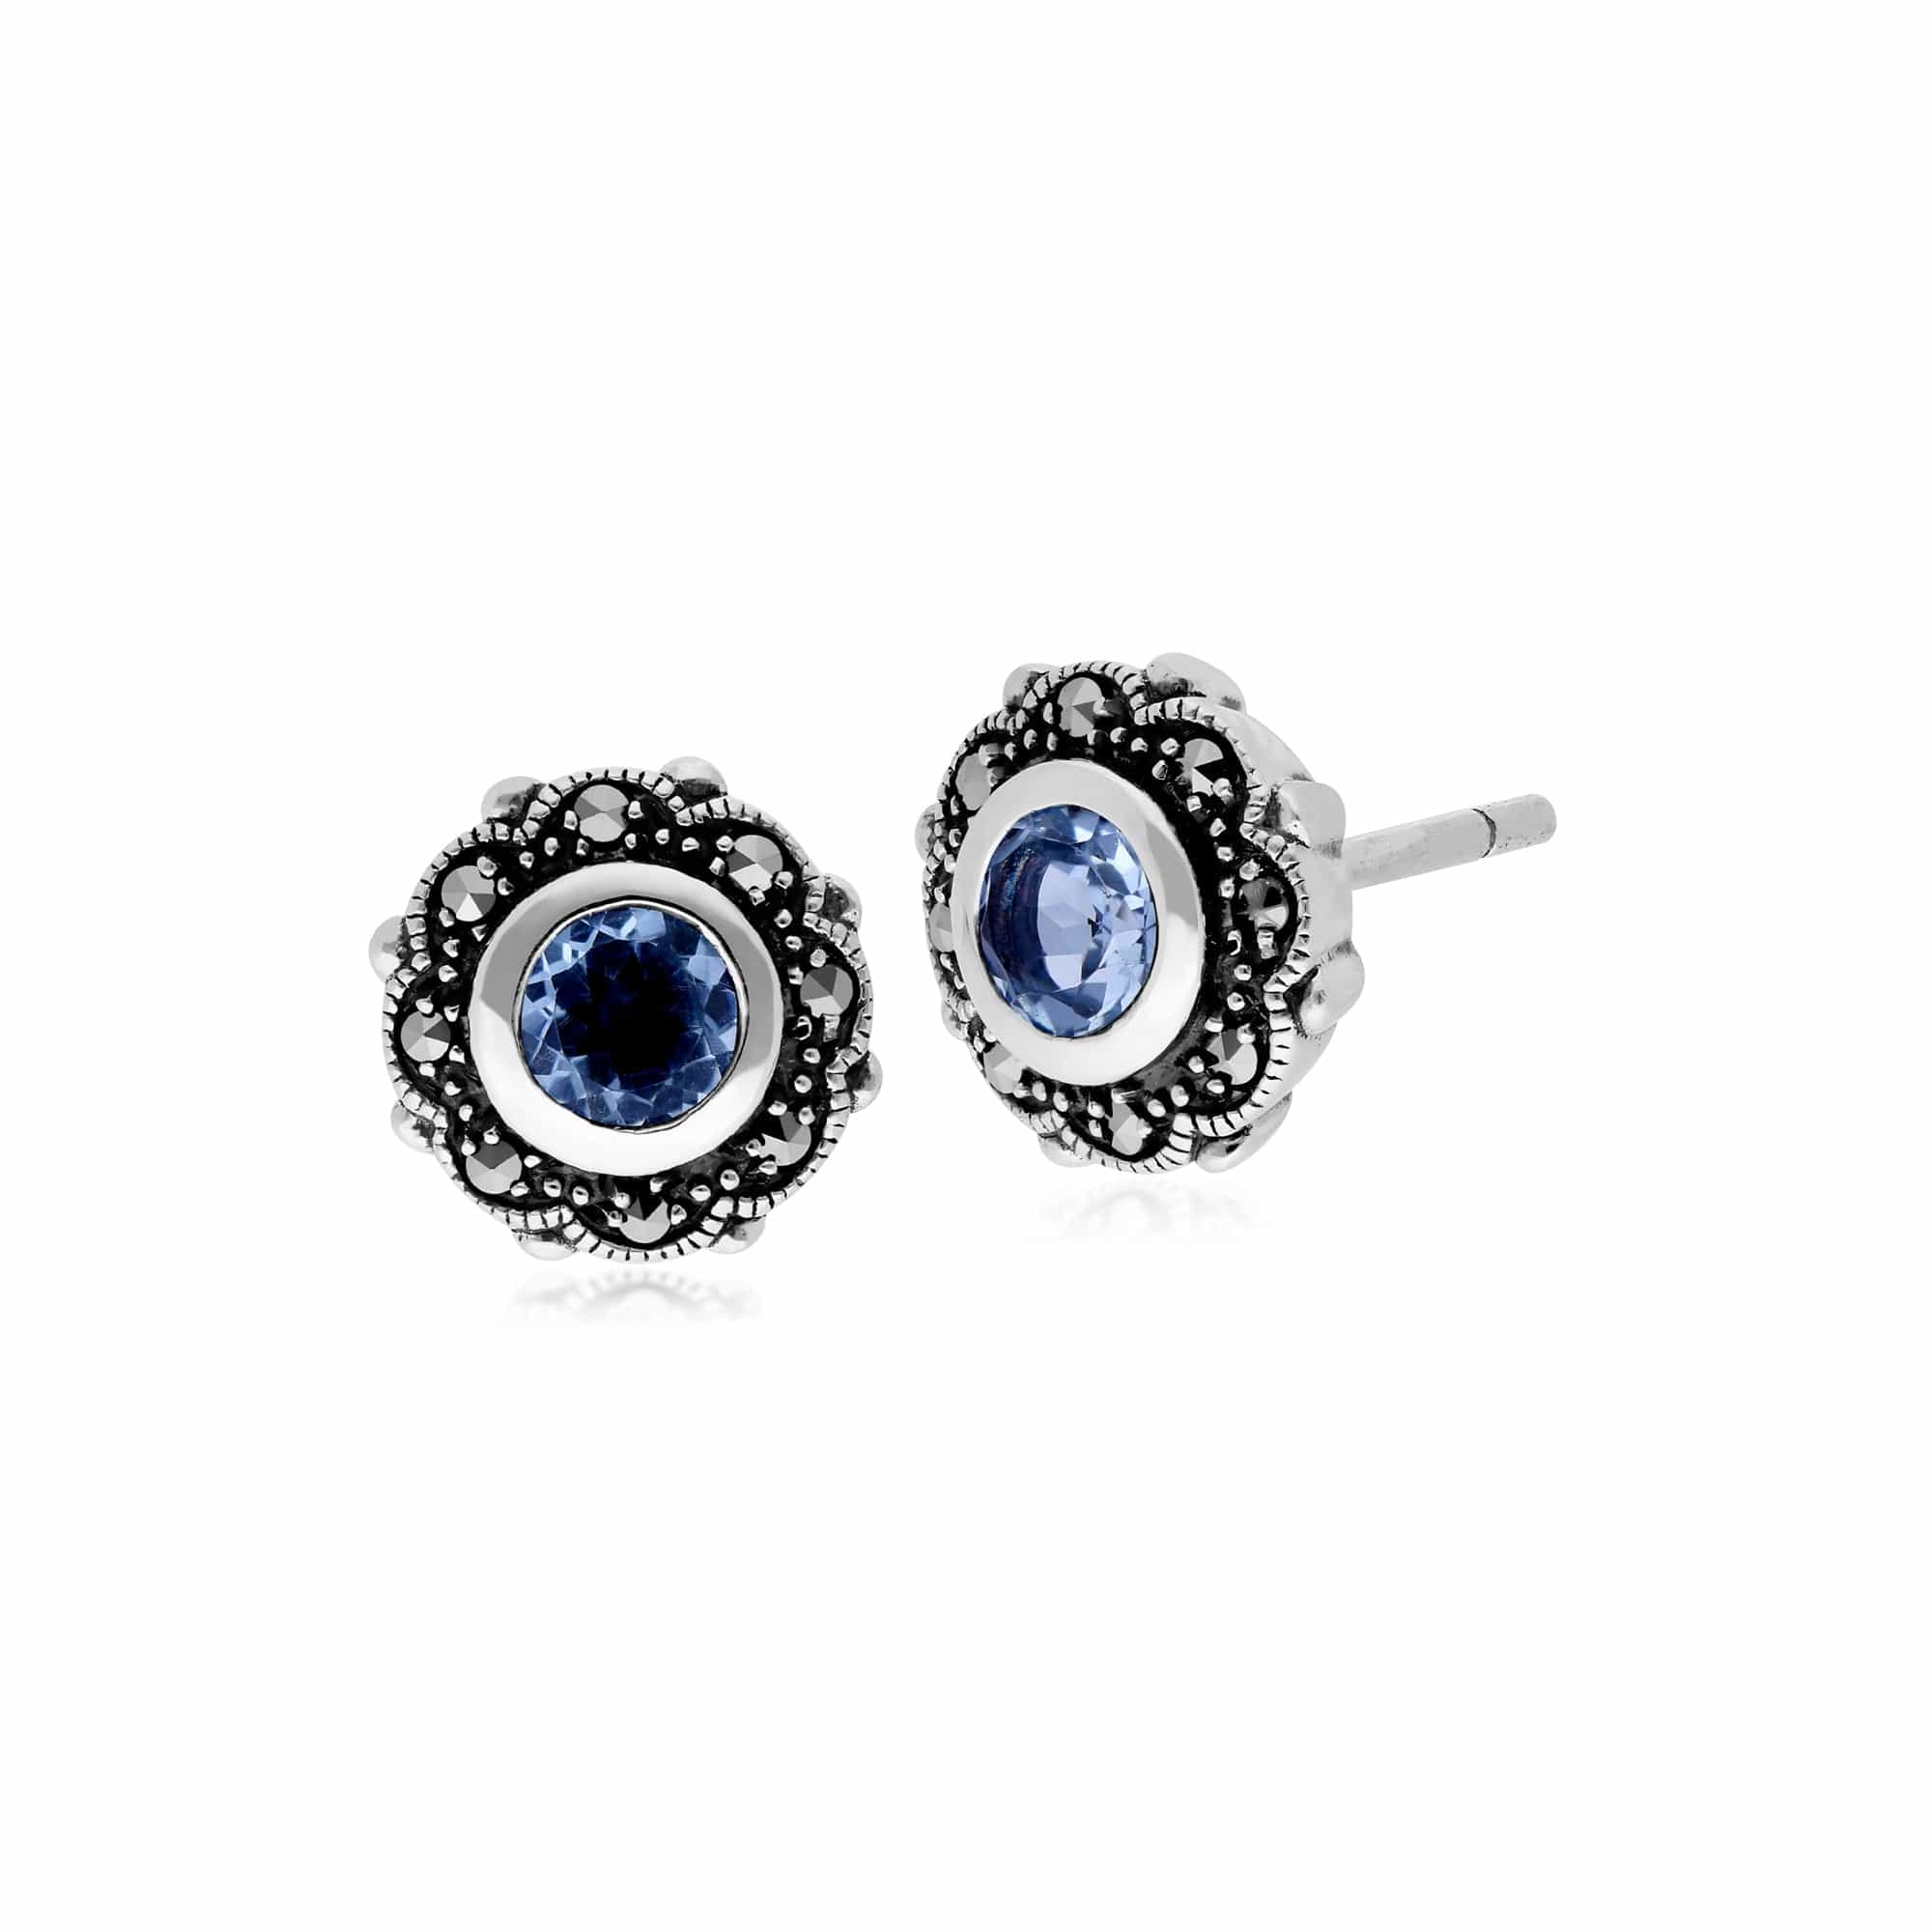 214E852403925 Art Nouveau Style Round Blue Topaz & Marcasite Floral Stud Earrings in 925 Sterling Silver 1